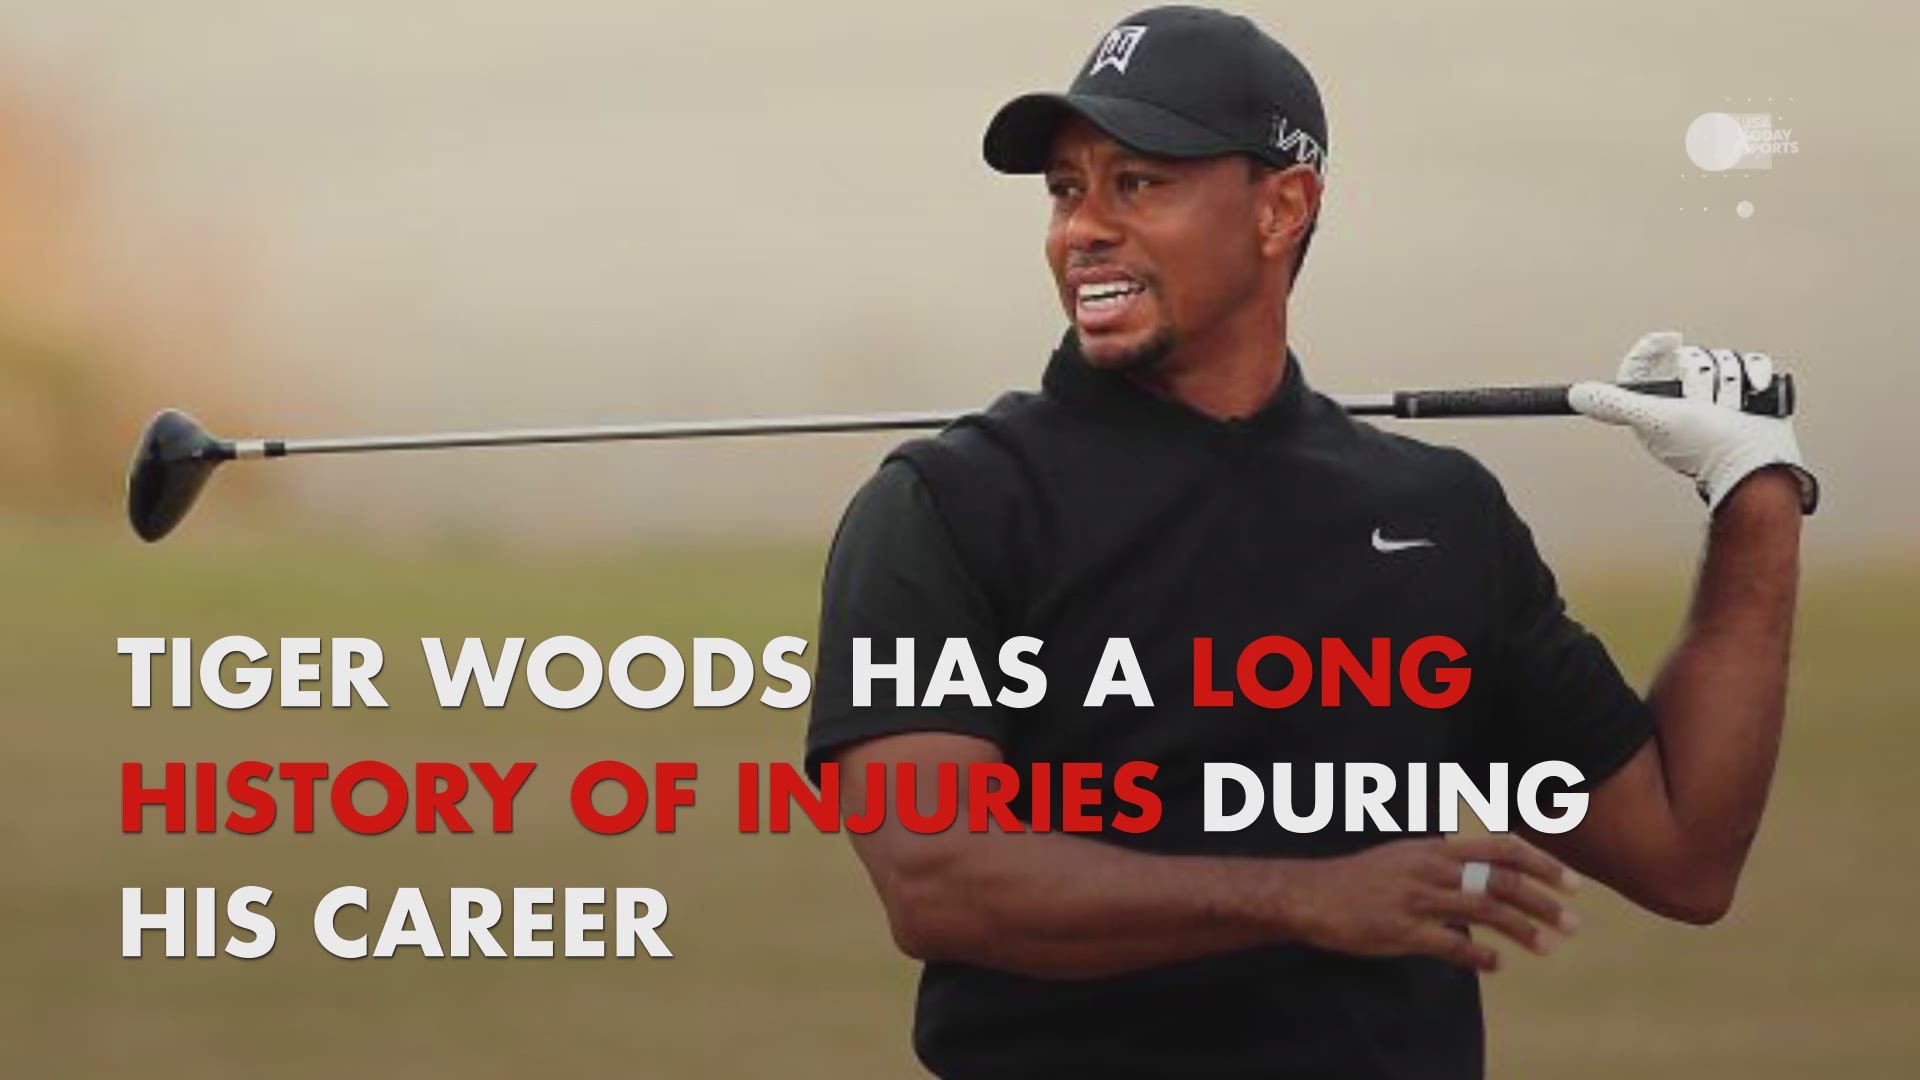 A breakdown of Tiger Woods' extensive injury history.